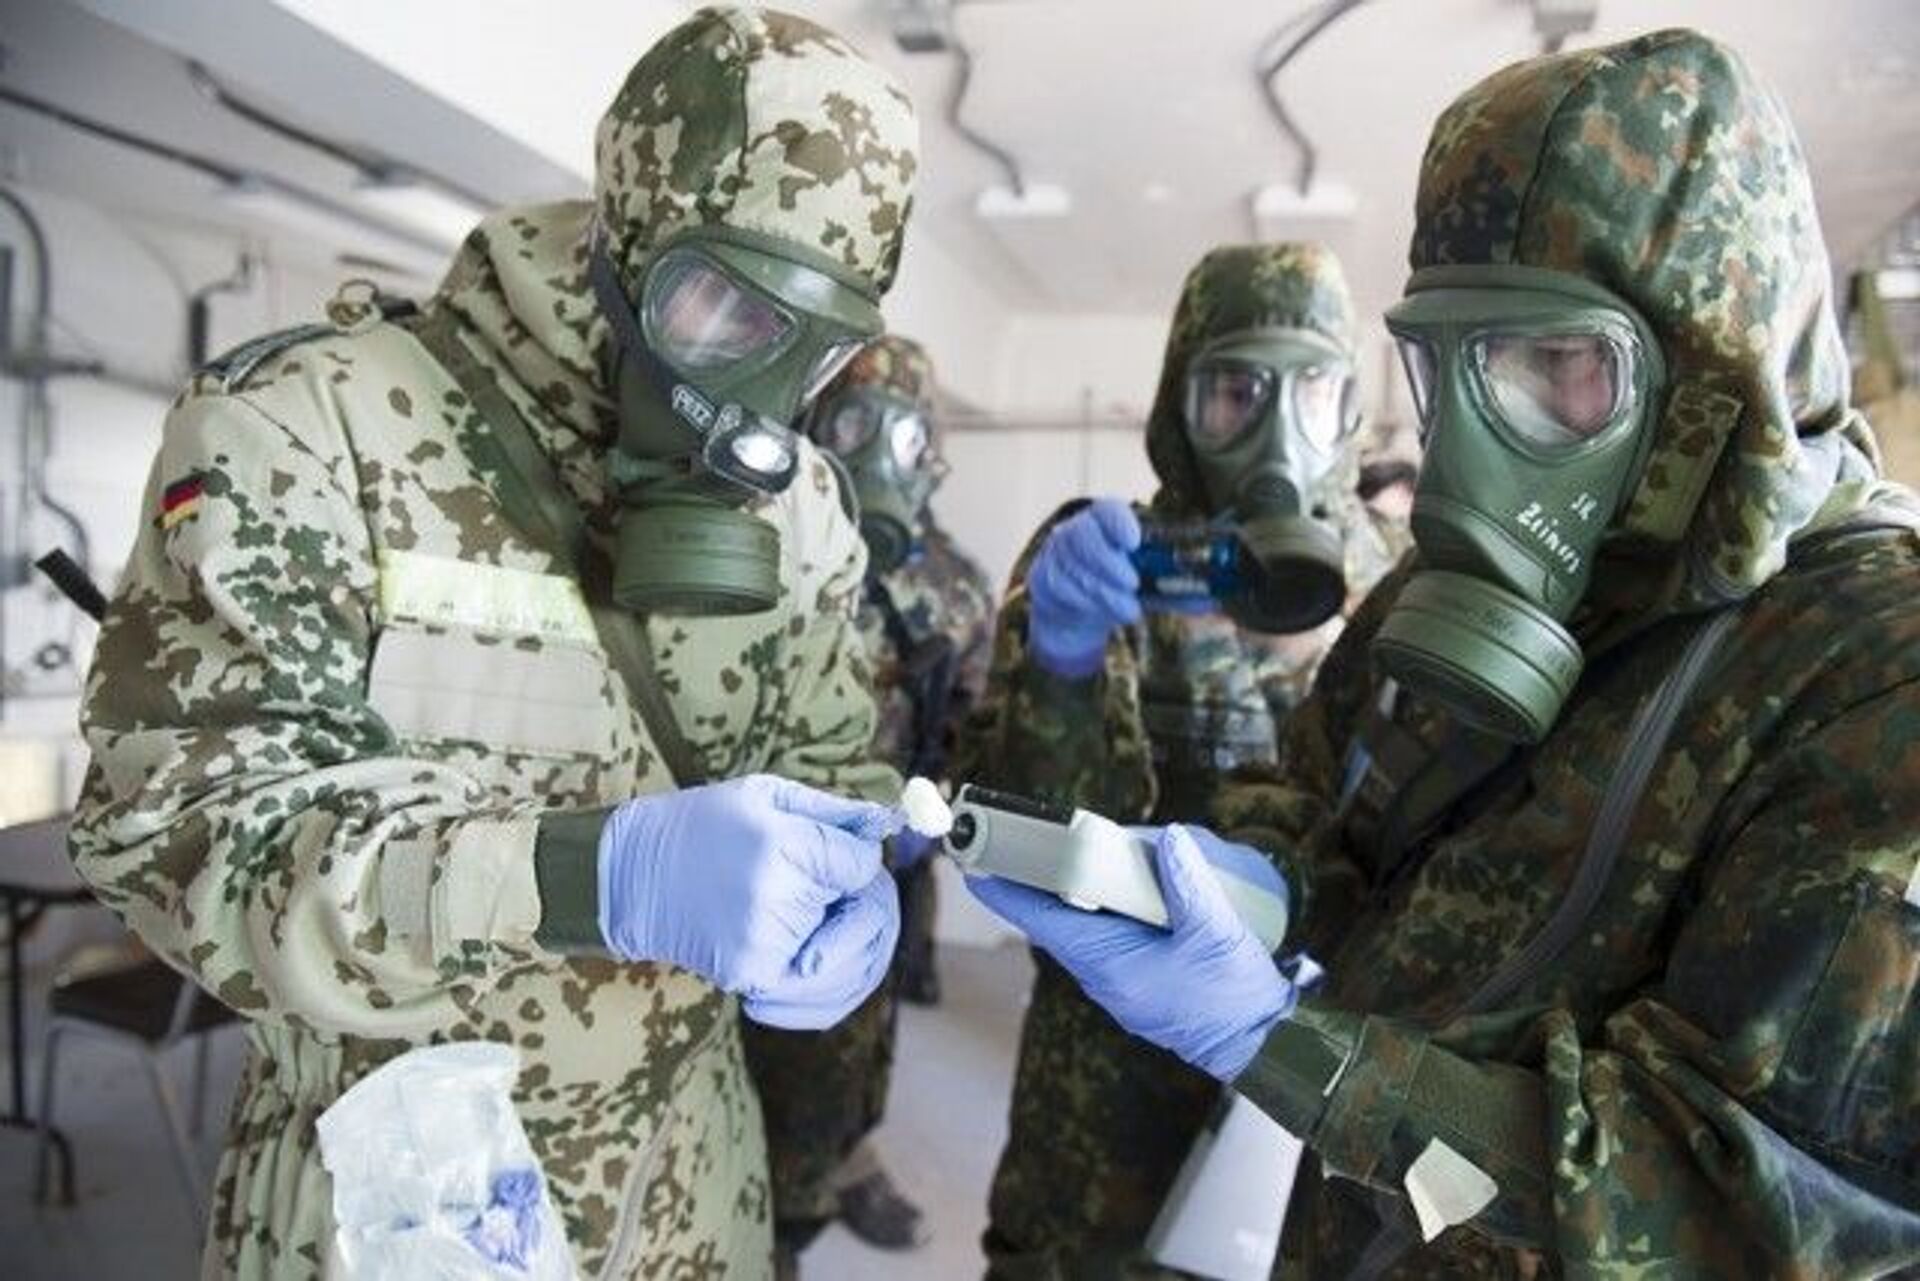 US Develops Individual Biological Weapons Plans for Different Countries, Russia Says - Sputnik International, 1920, 11.05.2021